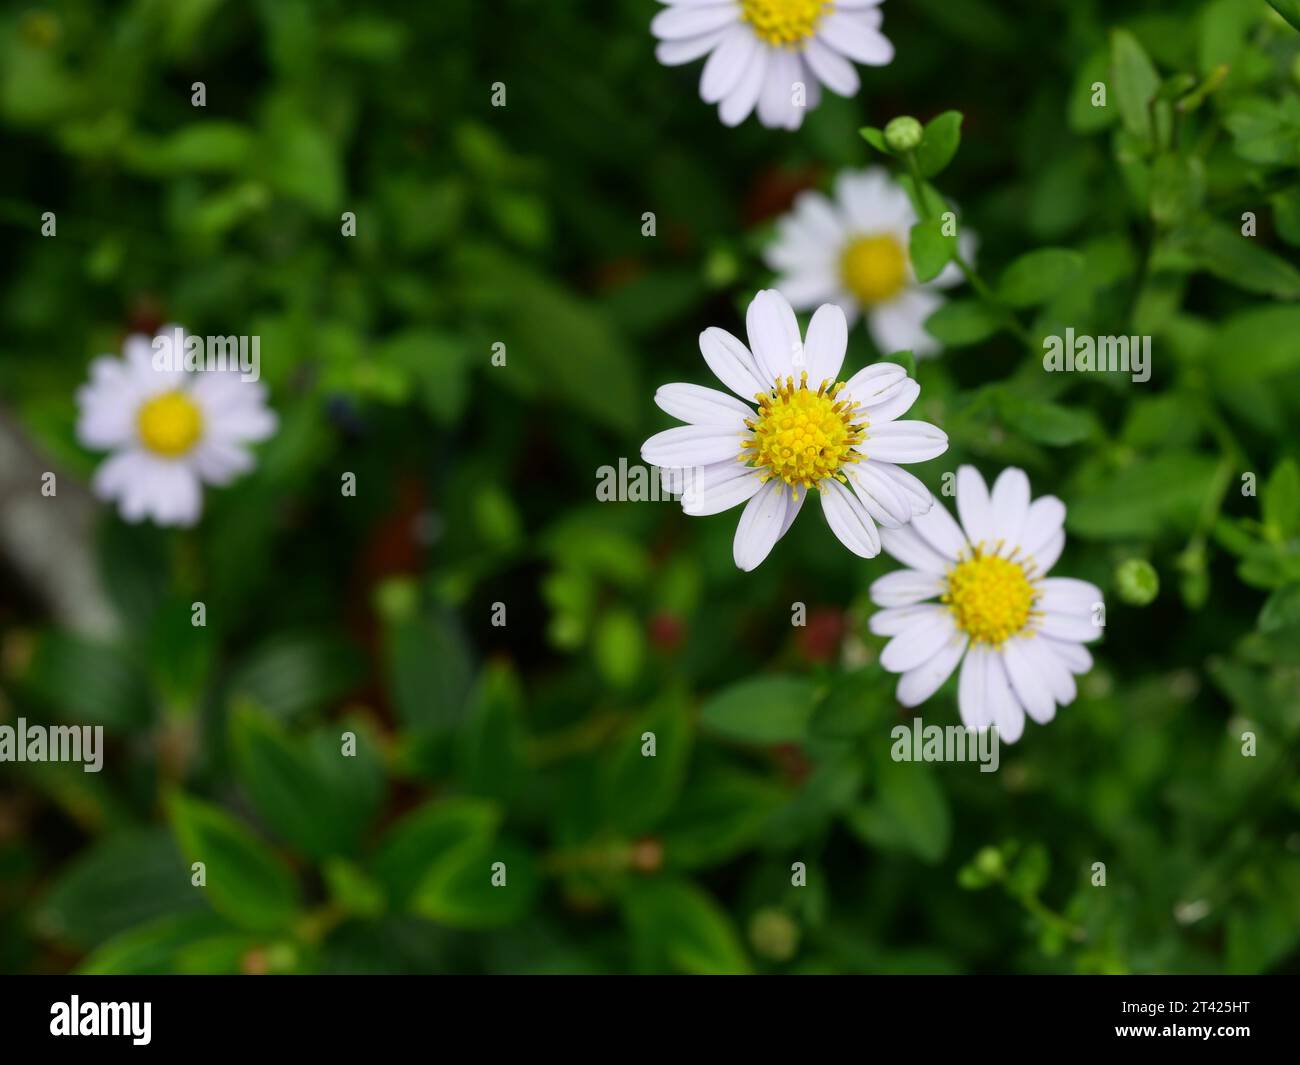 Bellis perennis or daisy blossom with natural green backgroud, Flower with white petals and yellow stamens Stock Photo